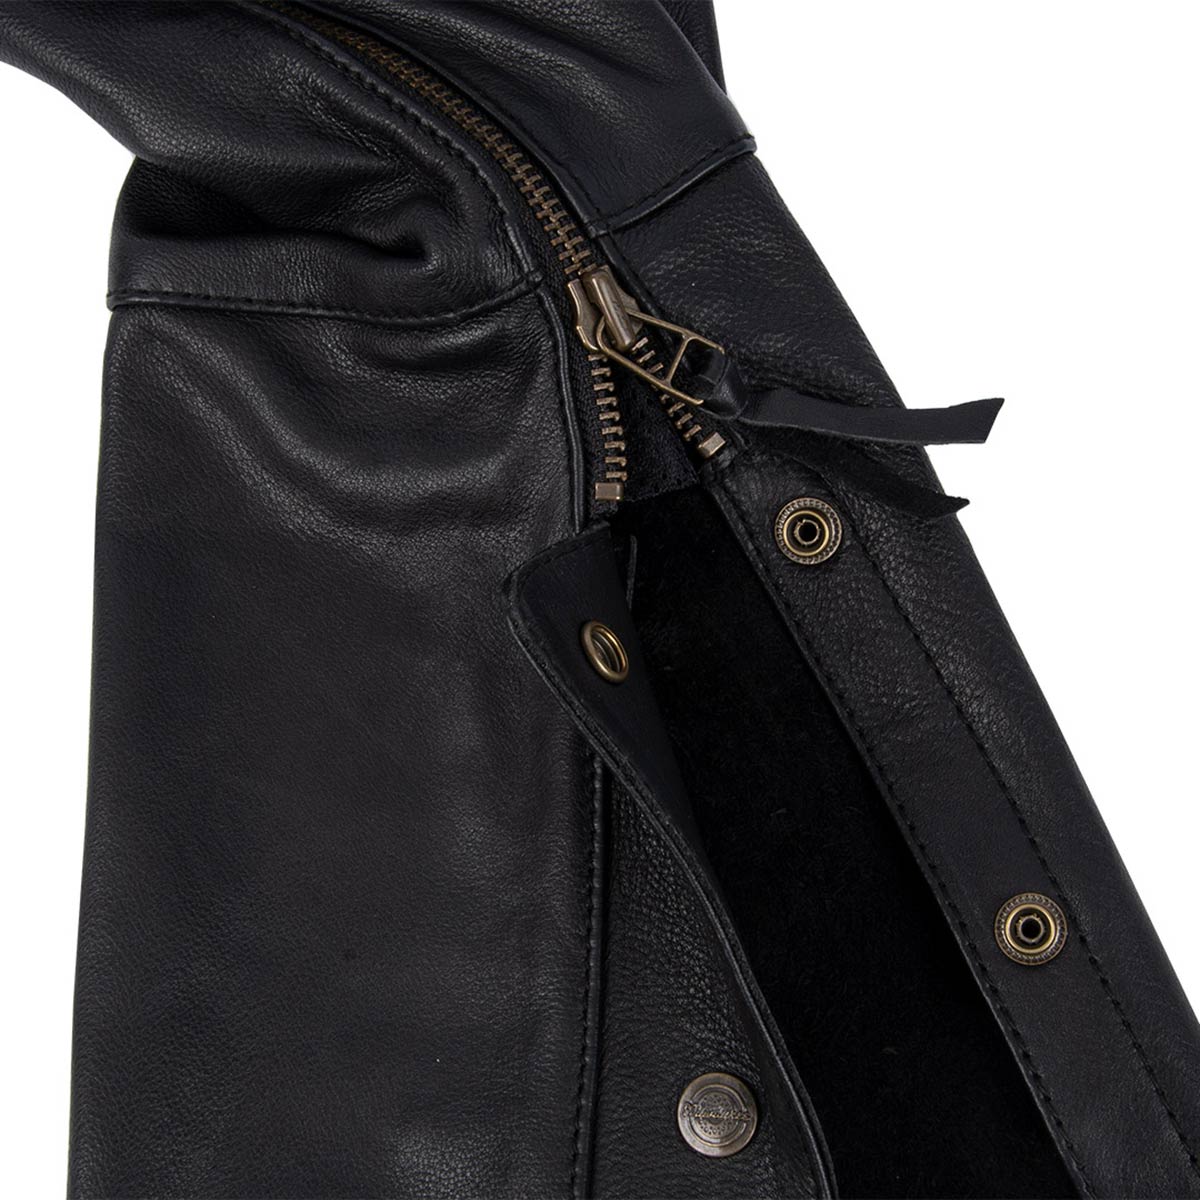 Milwaukee Motorcycle Clothing Company MV8020 Men's Black Leather Motorcycle Chaps with Gusset Thigh